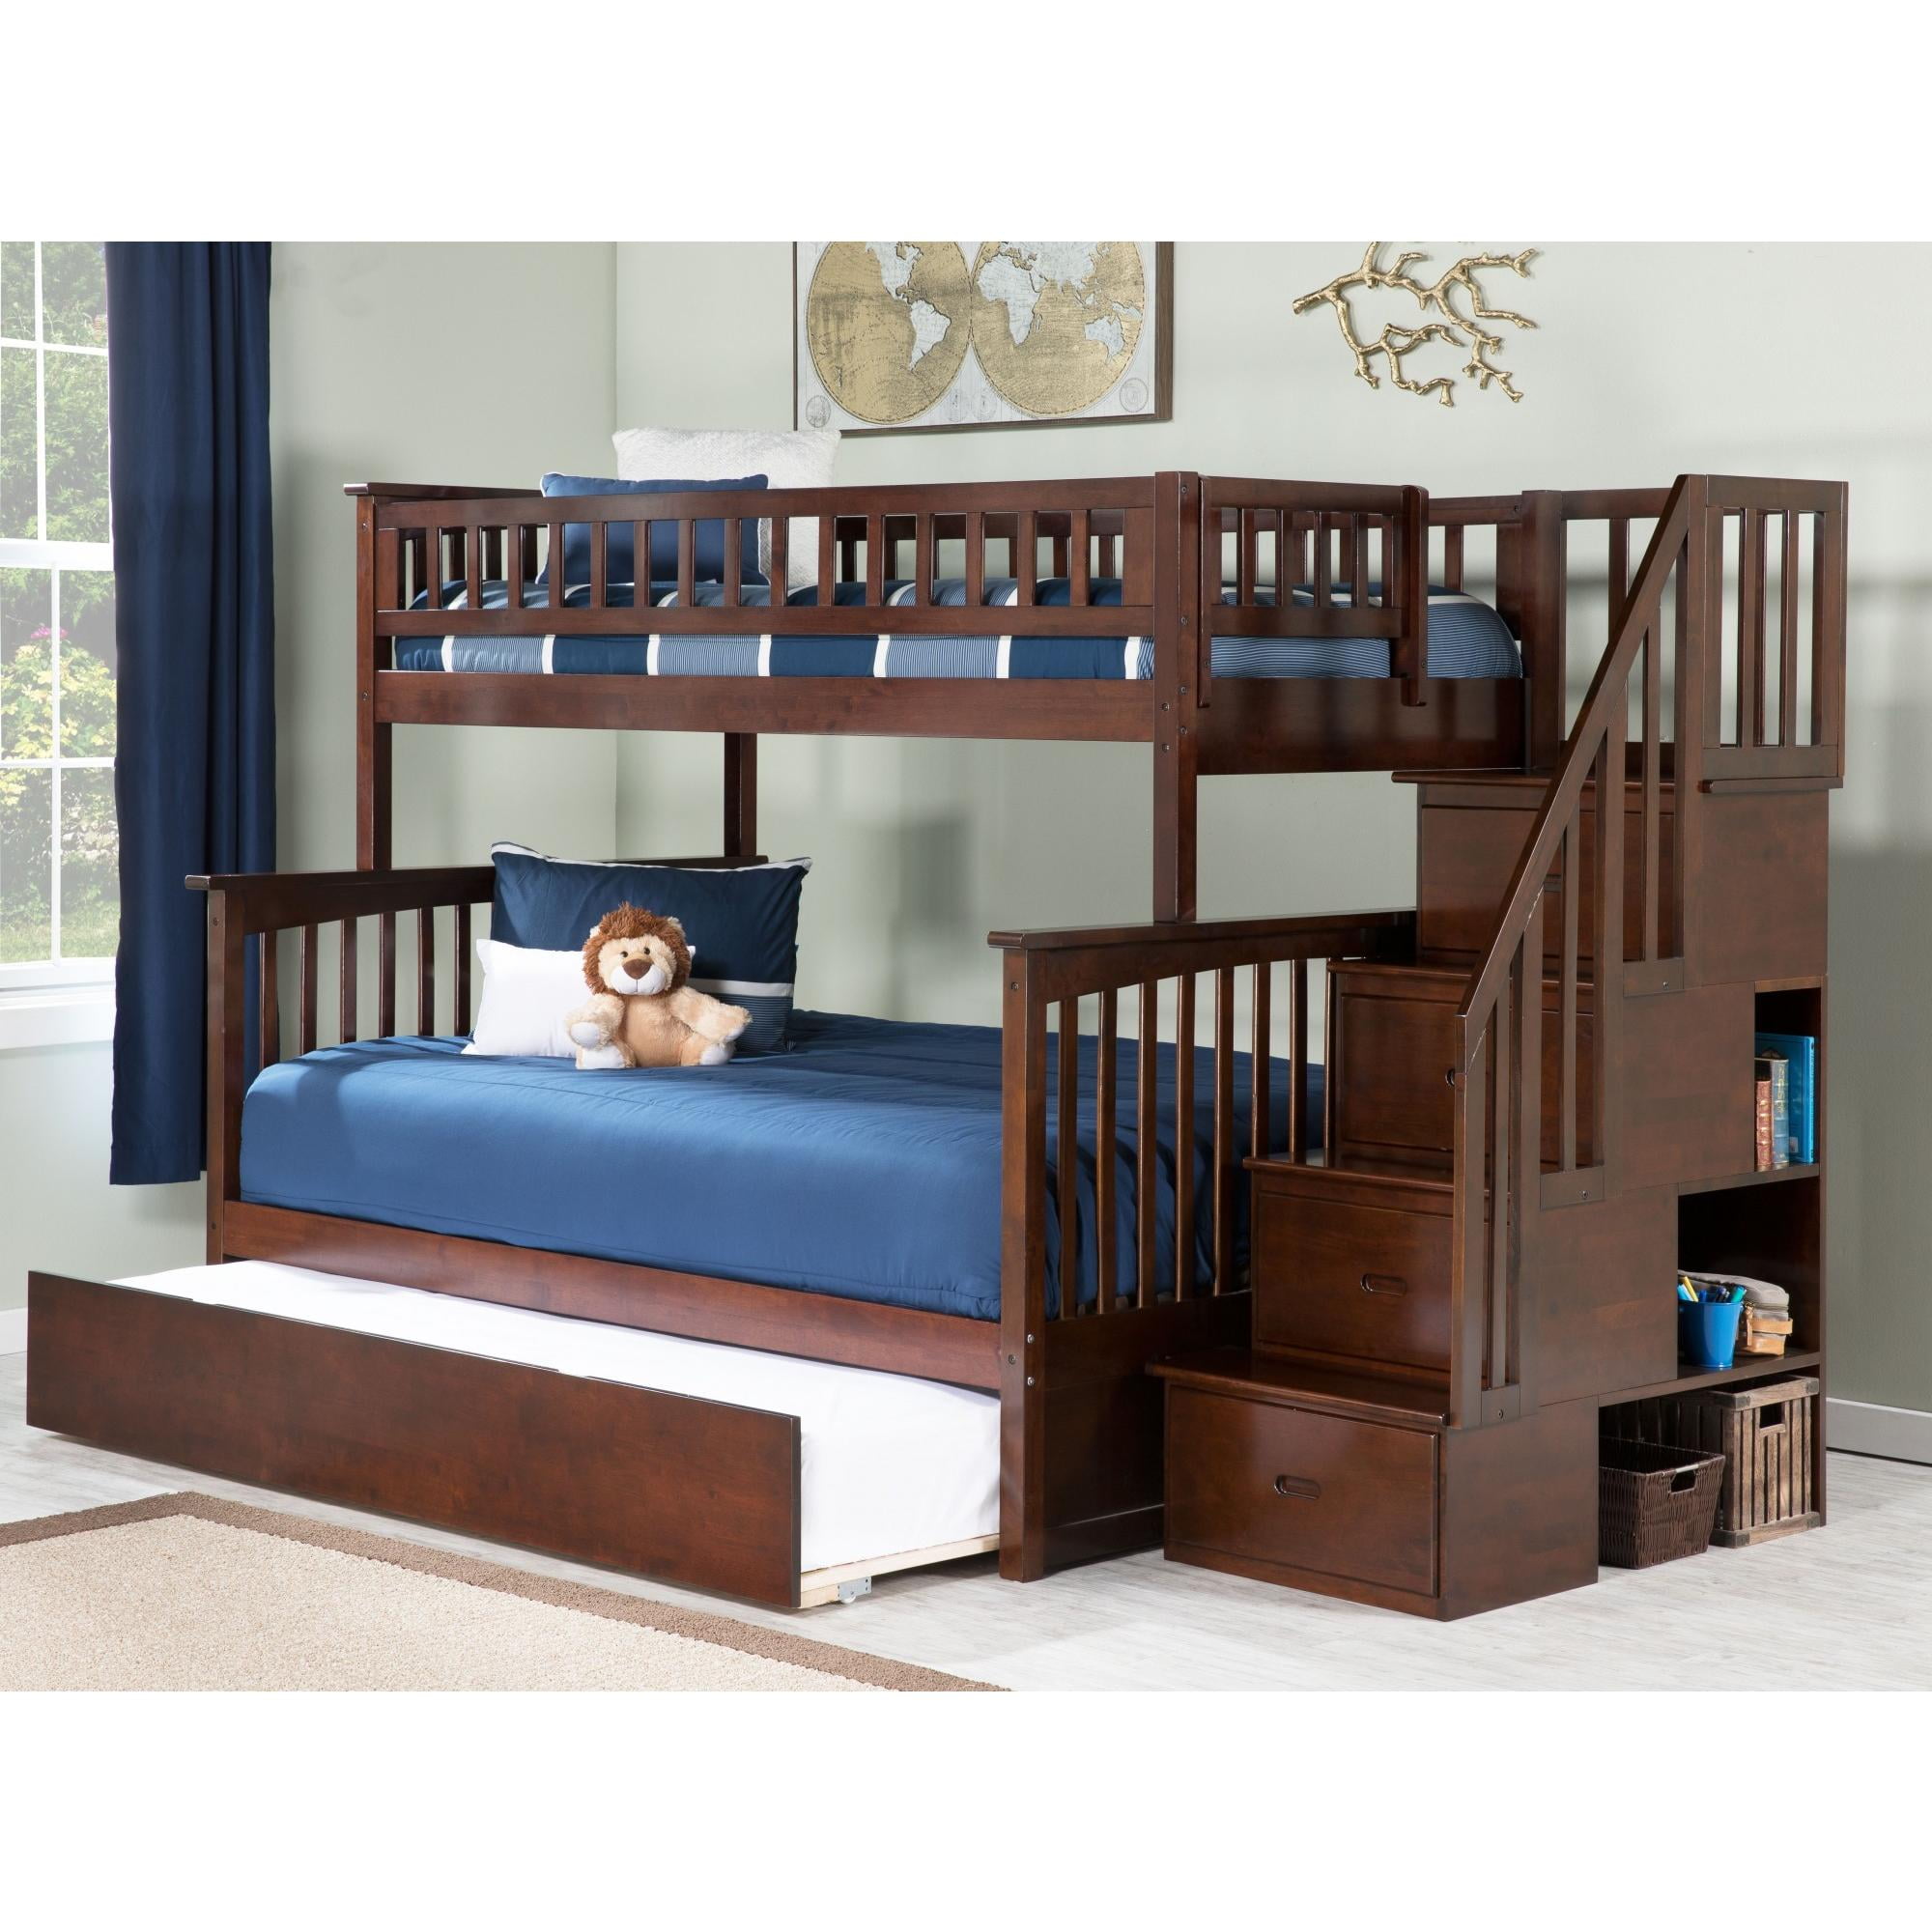 Columbia Staircase Bunk Bed Twin Over, Shyann Staircase Twin Over Full Bunk Bed With Trundle